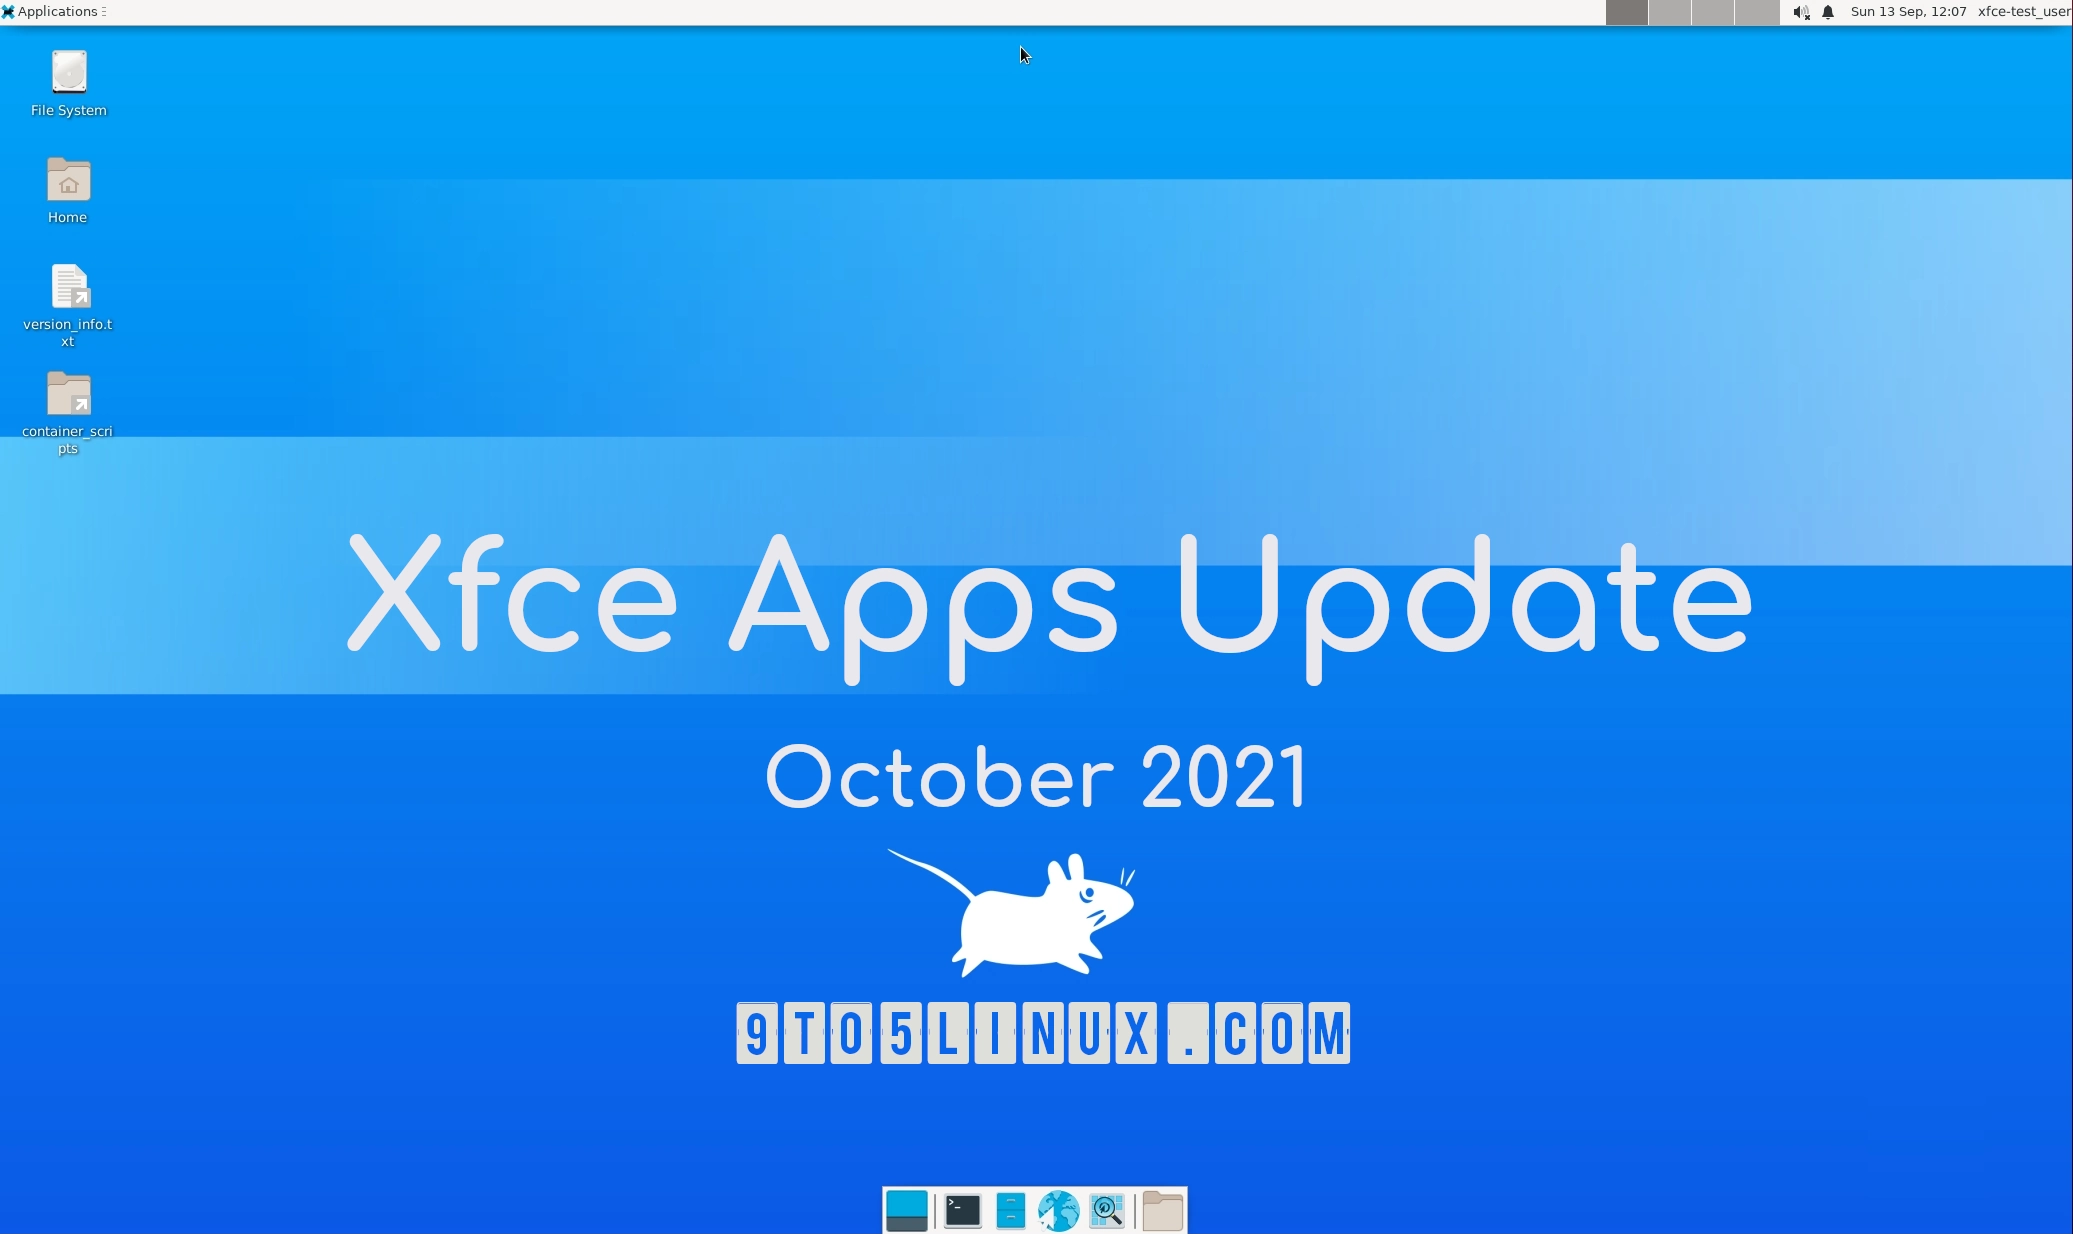 Xfce’s Apps Update for October 2021: New Releases of Ristretto, Xfce Terminal, Whisker Menu, Xfdashboard